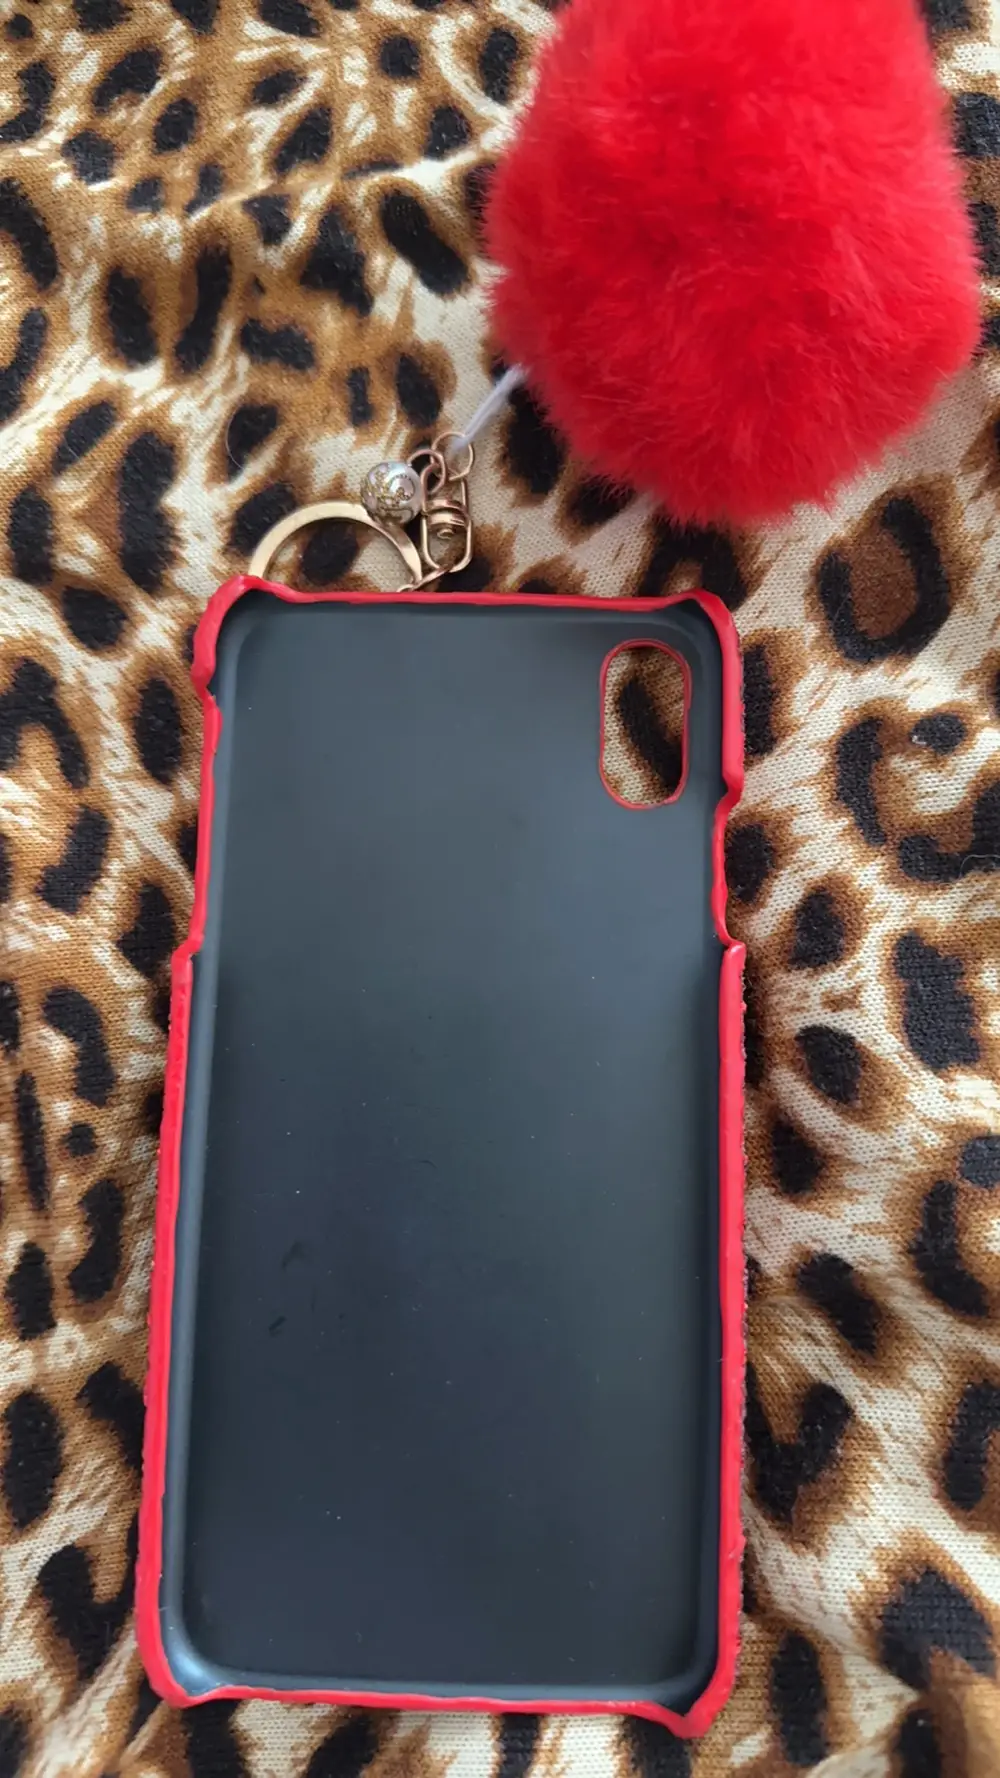 Iphone xs Max pro Rødt glimmer cover m/ pompon